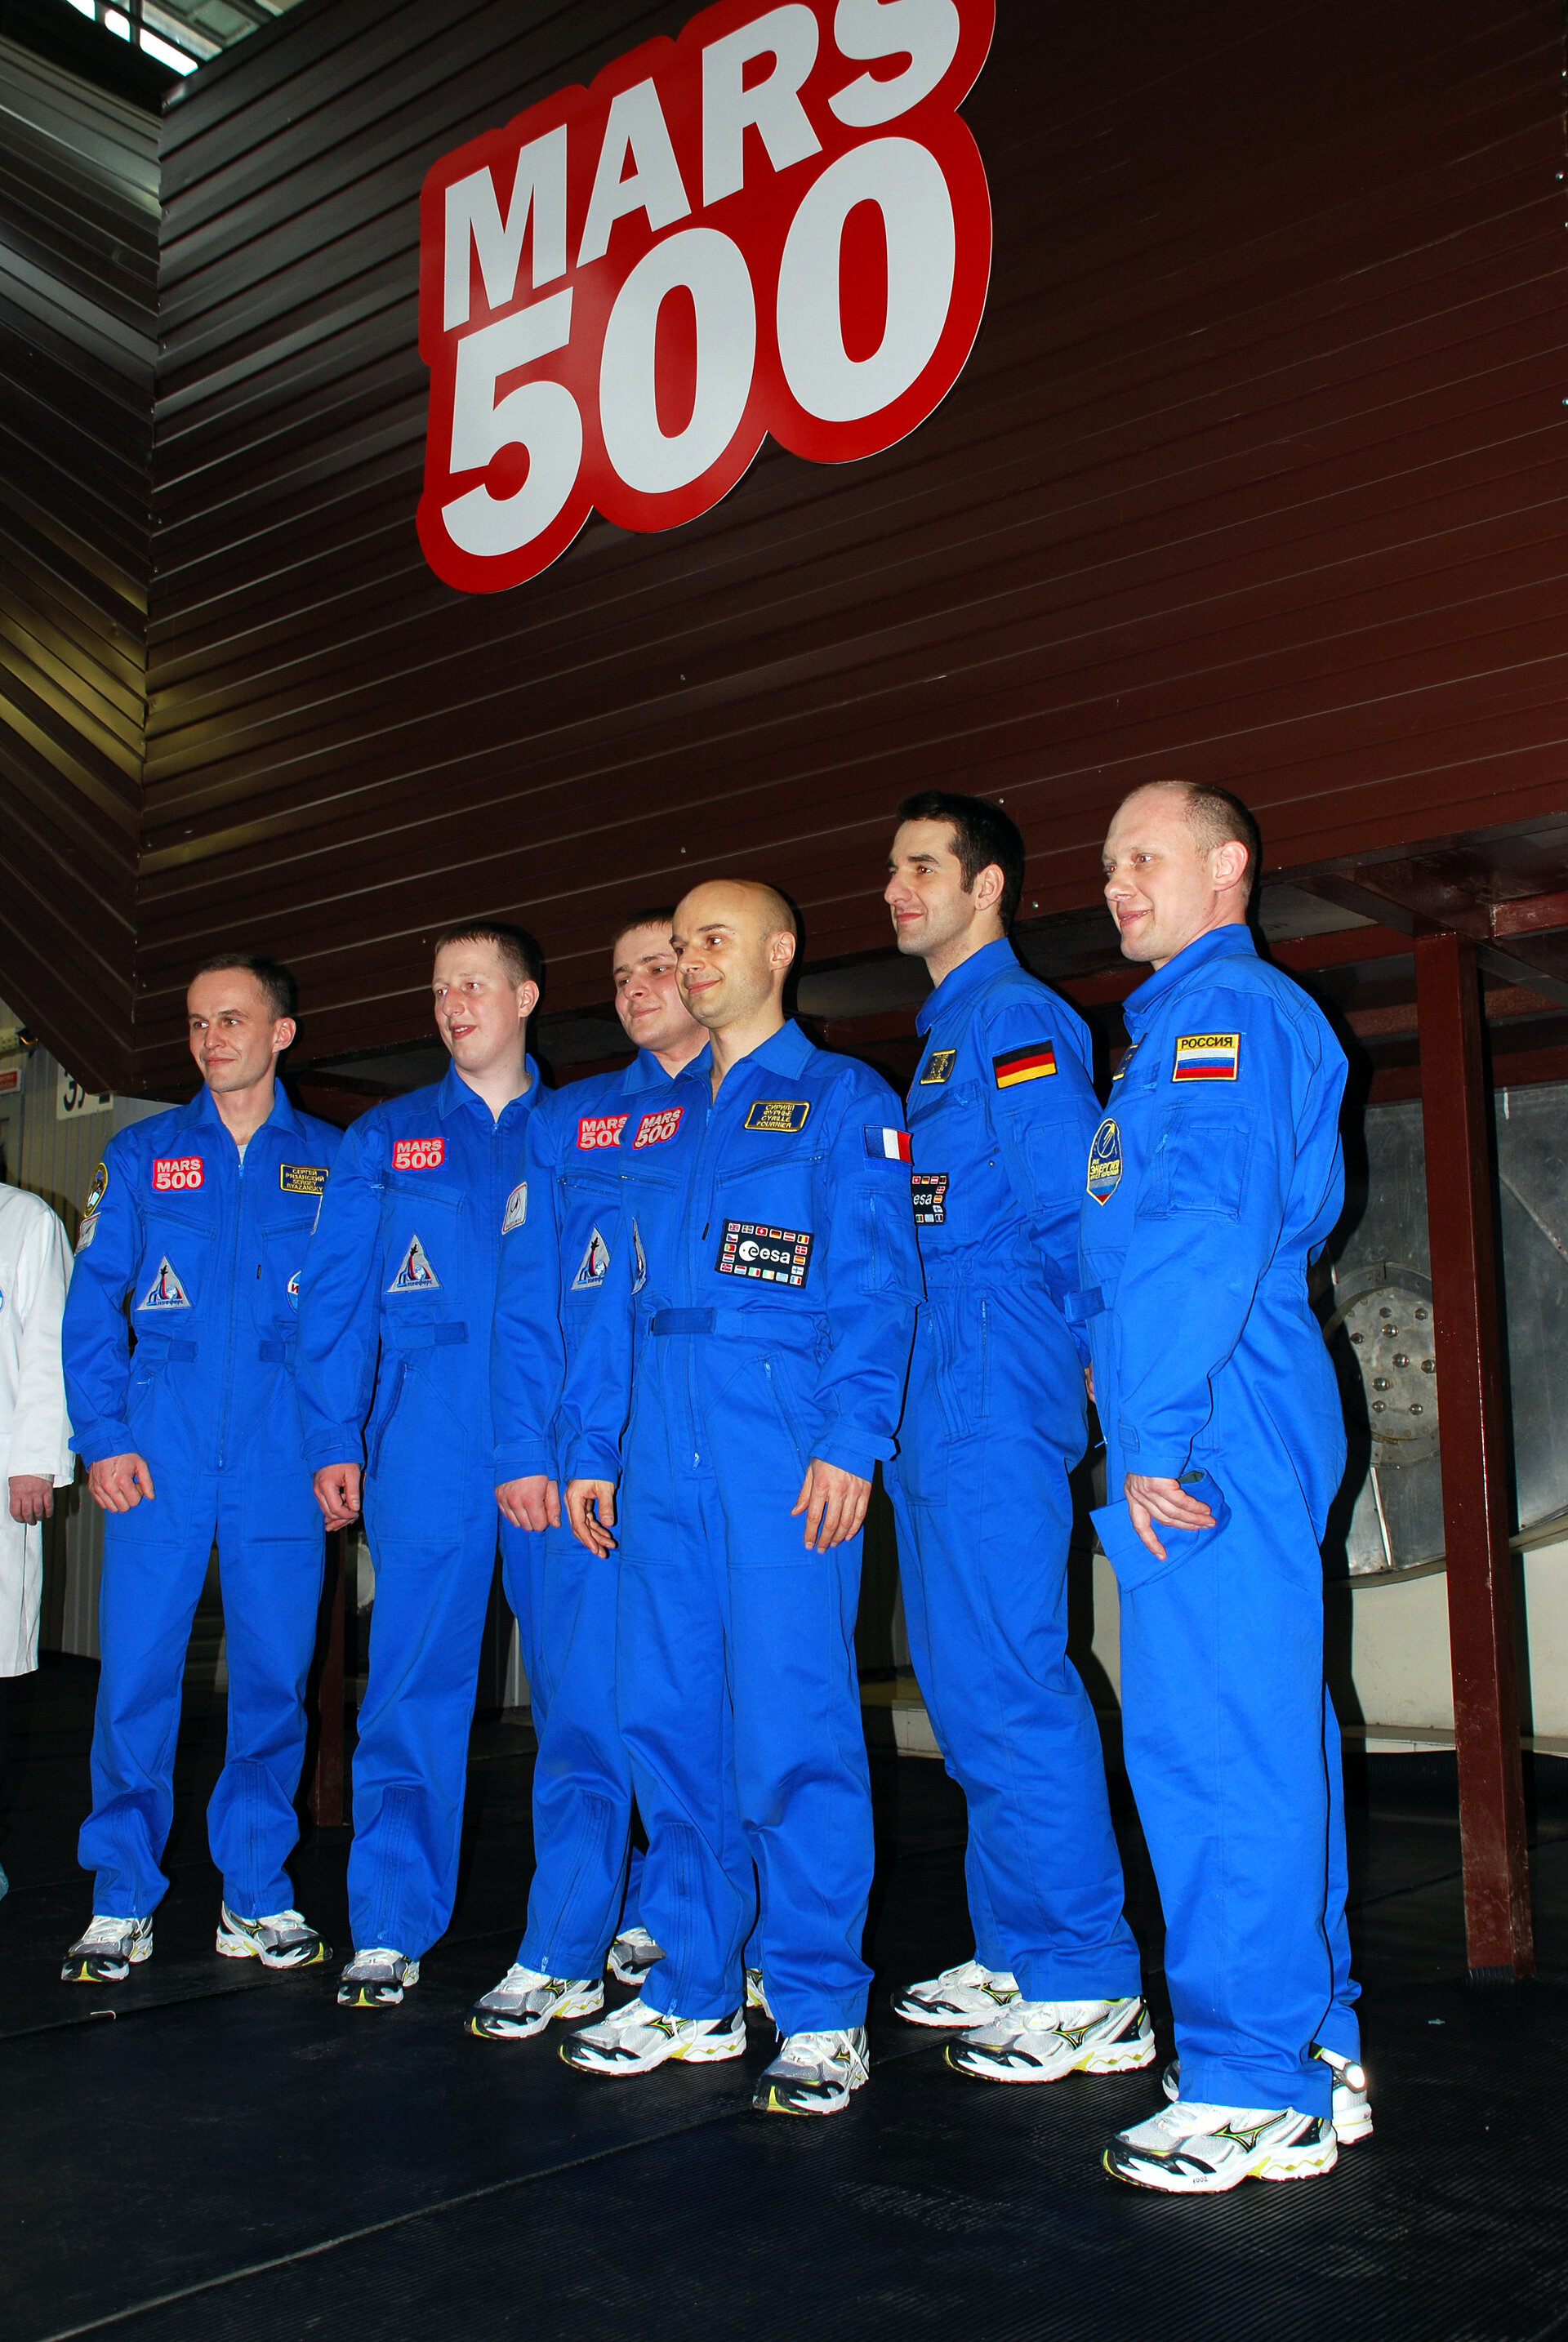 Mars500 crew prepares to enter the isolation facility at IBMP